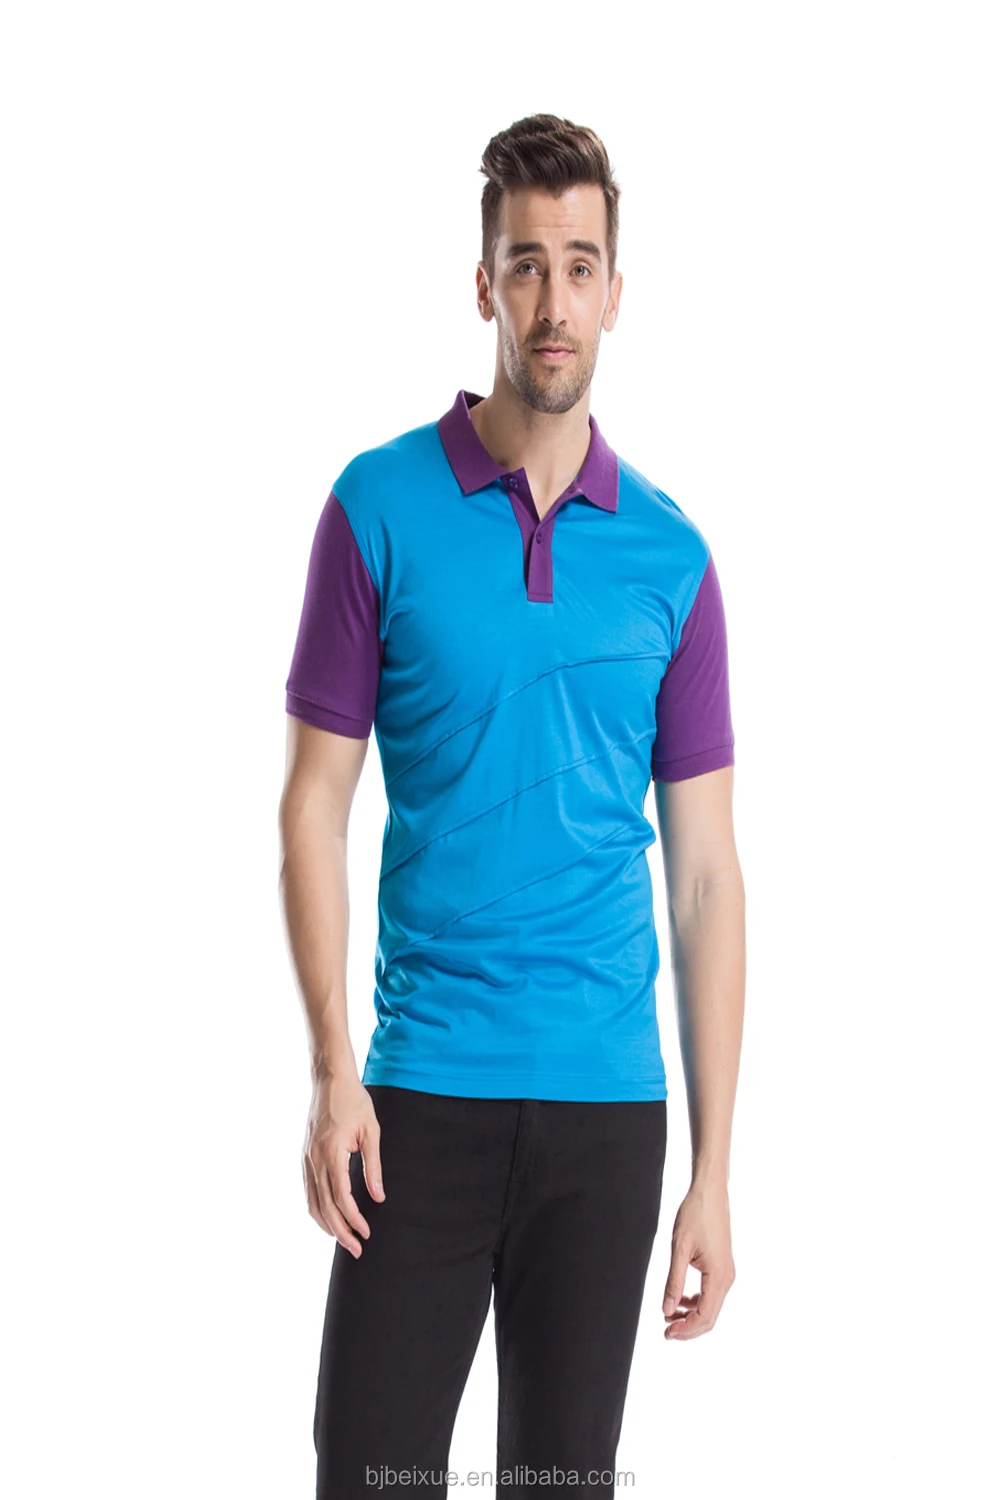 Schilderen botsing Ontwapening Top Sale Polo With Various Sizes And Colors With Factory Price - Buy Top  Sale,Cut And Sew Polo,Yellow And Black Polo Shirt Product on Alibaba.com